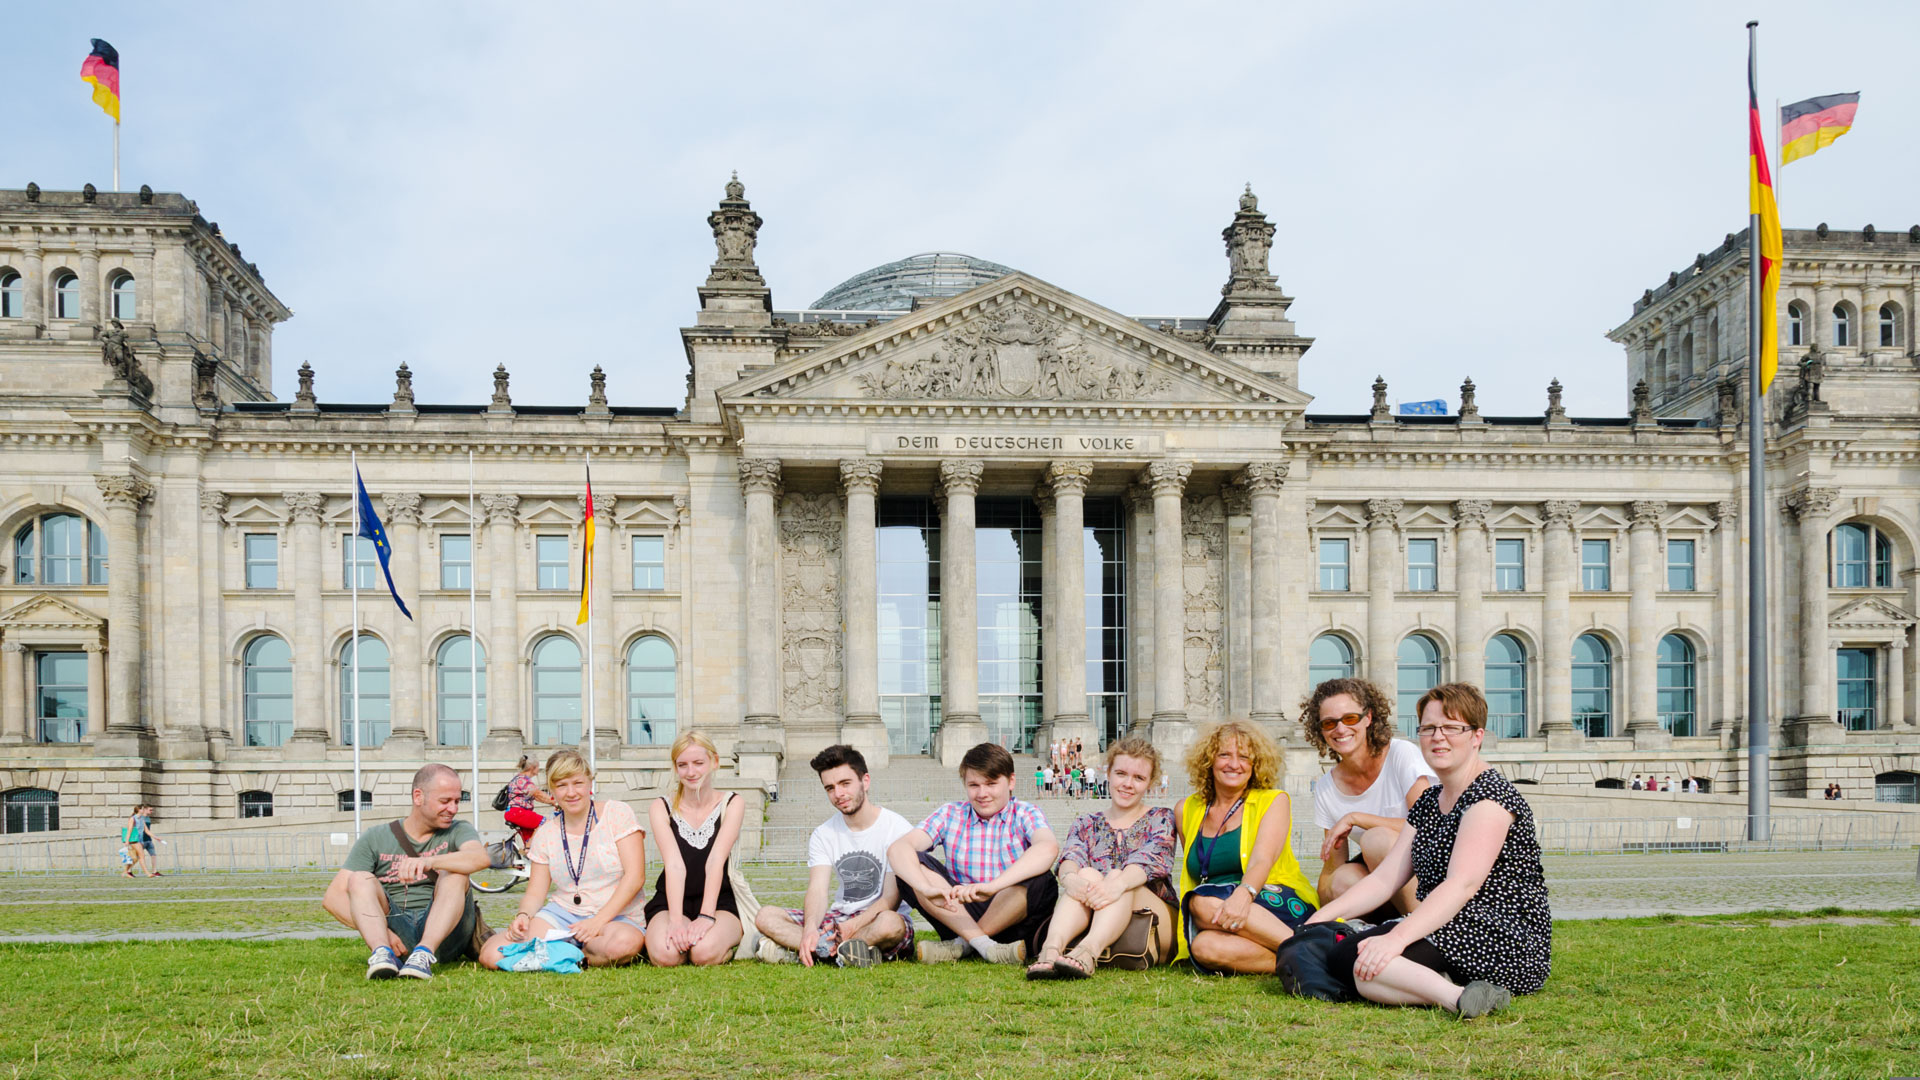 City walks, here to the Reichstag, are part of the leisure program.